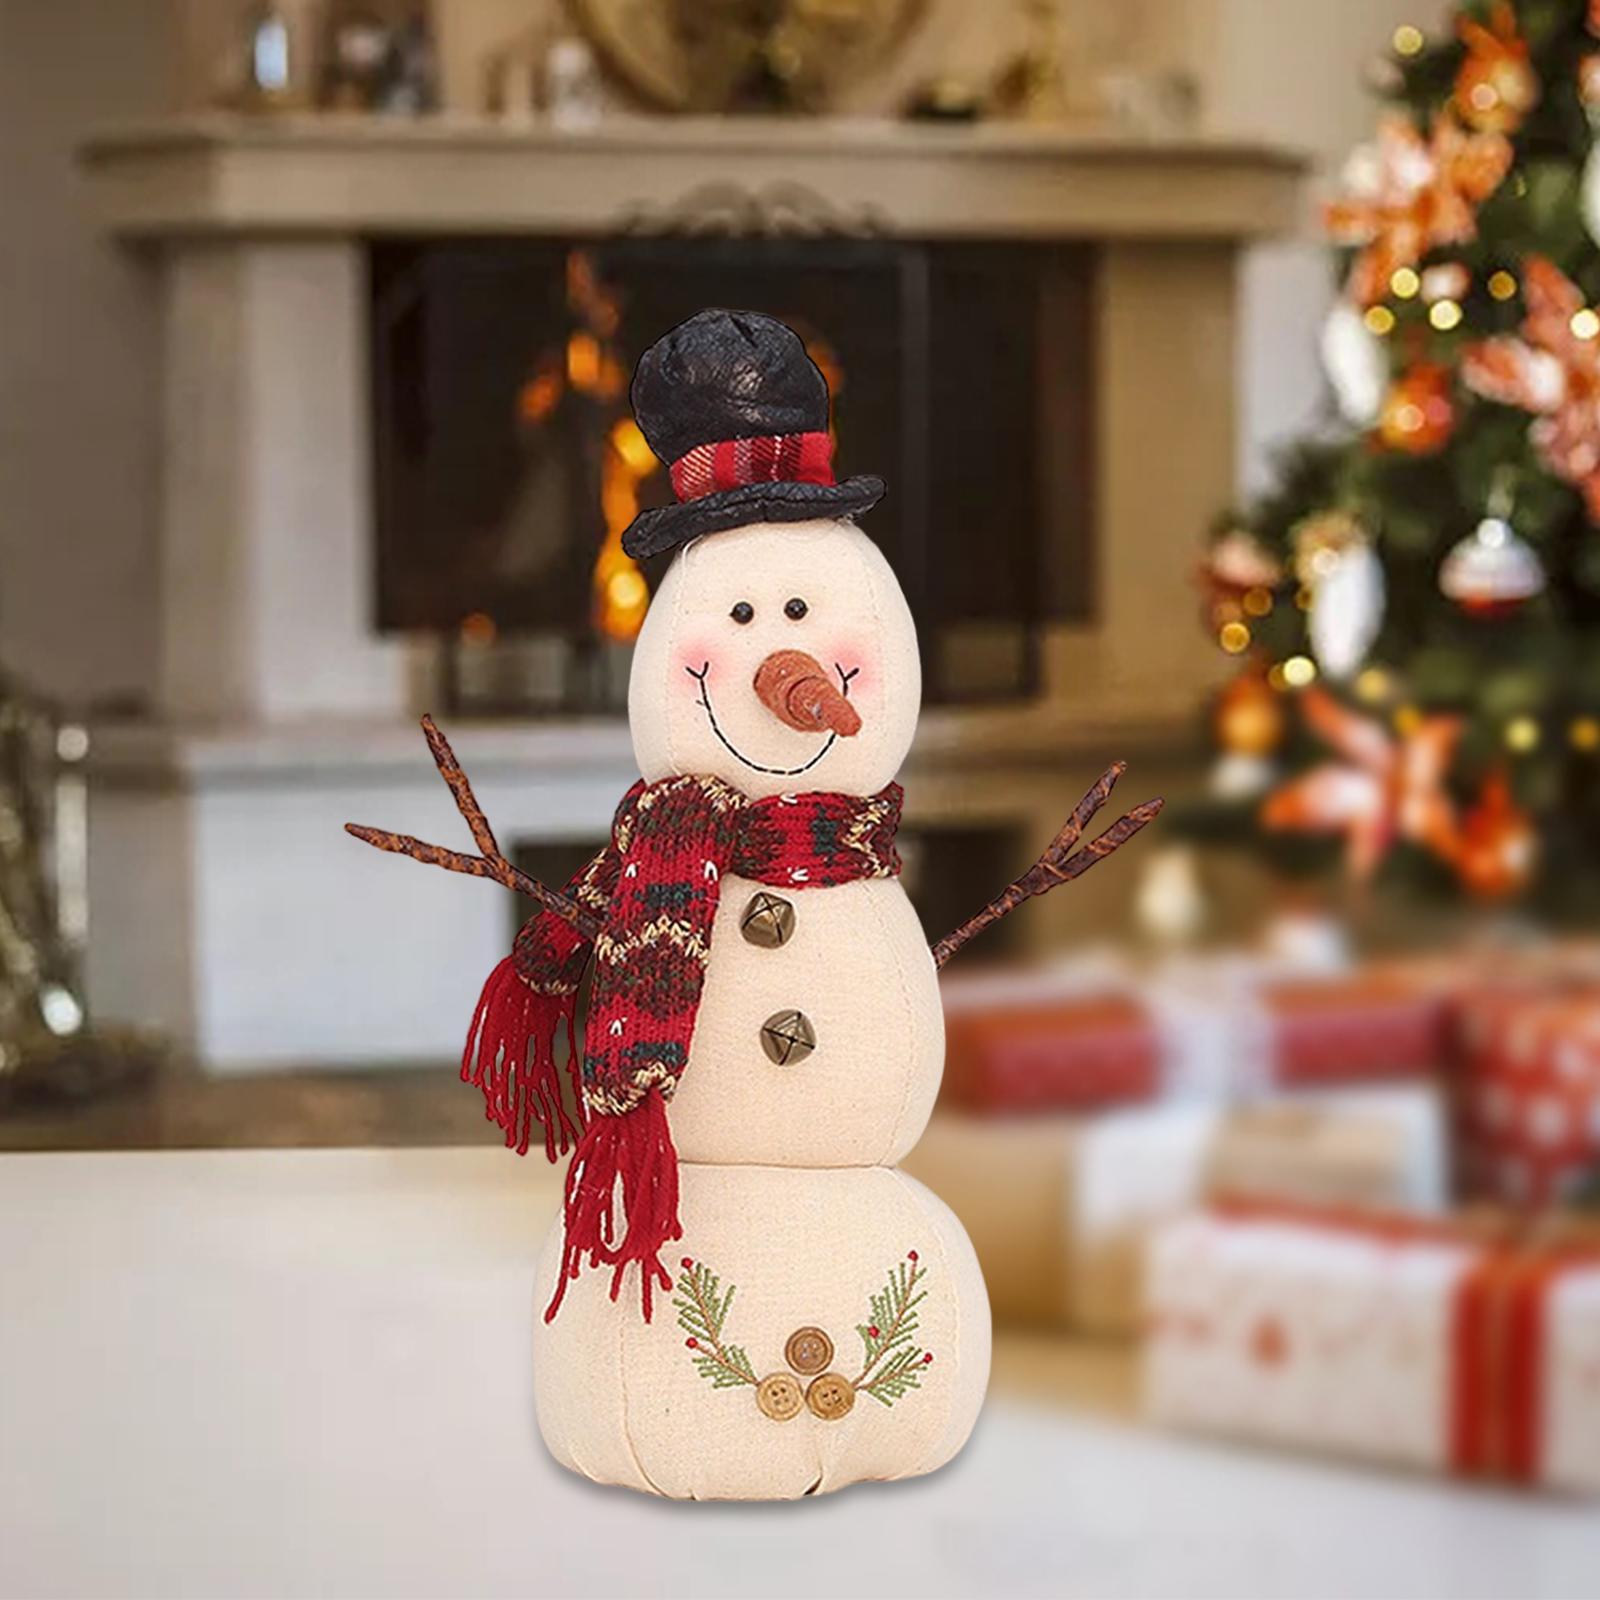 Christmas White Snowman Doll Figurines Plush for Fireplace Atmosphere Decor